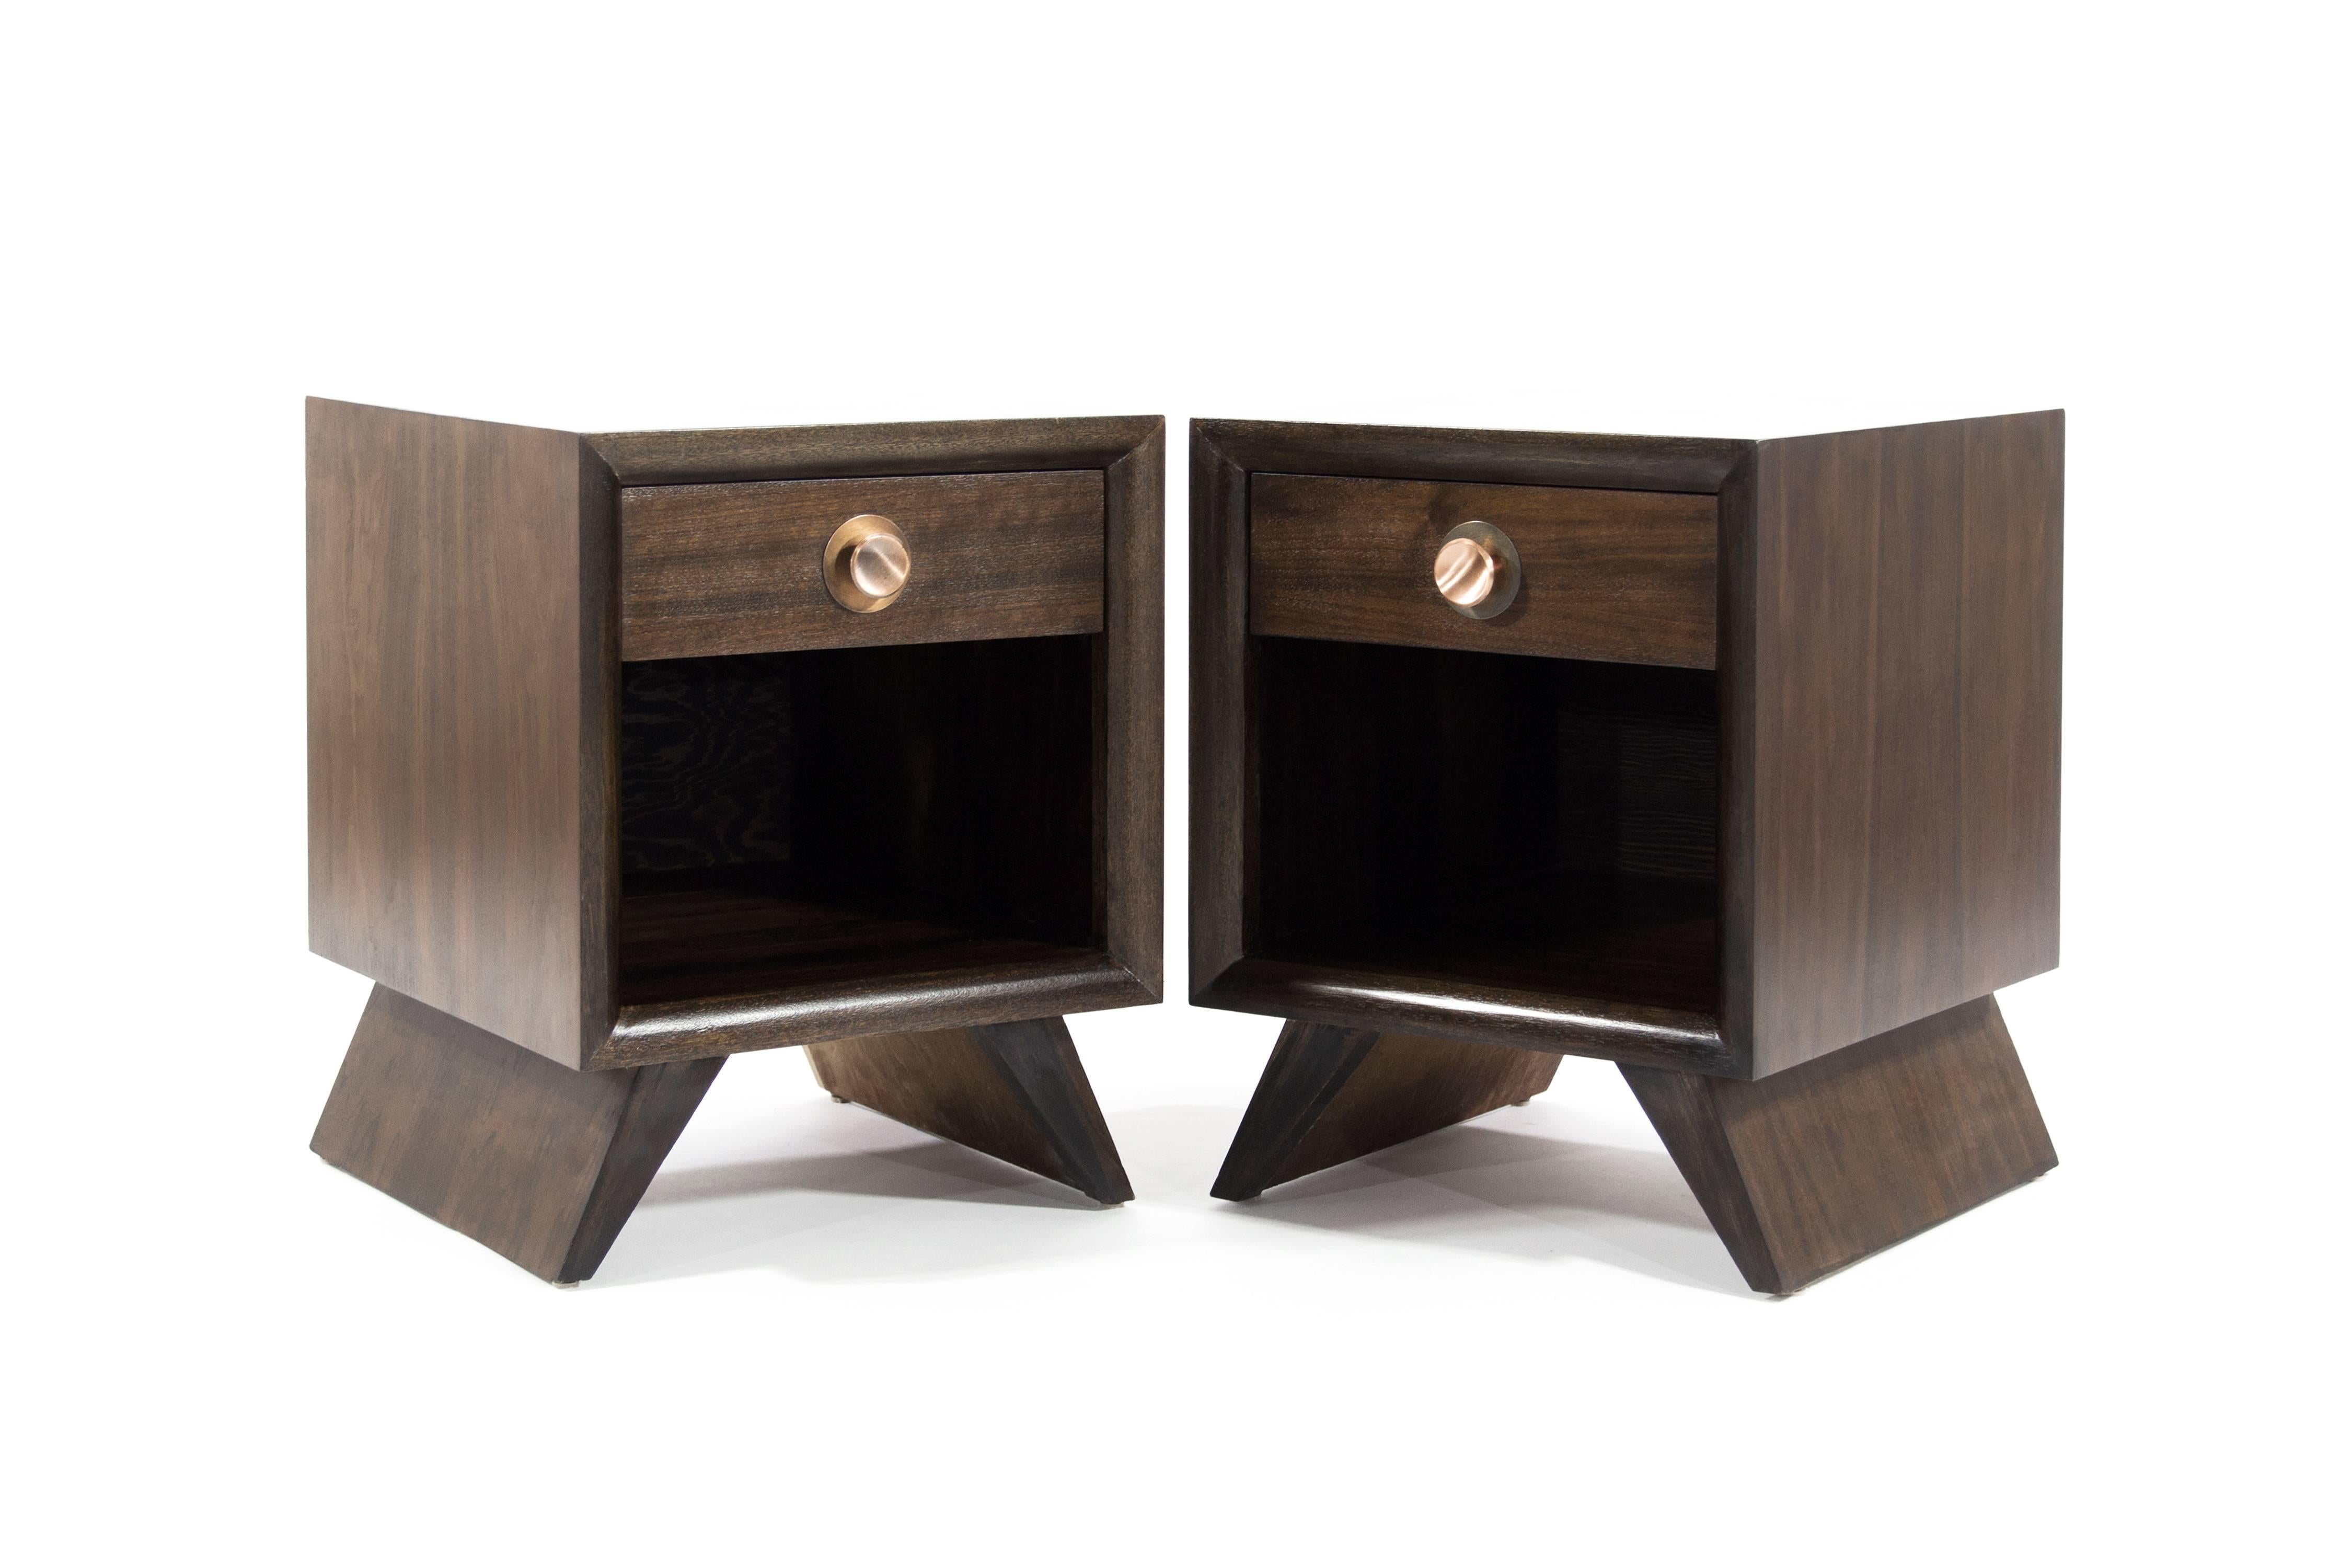 Exquisite pair of Mid-Century Modern walnut end tables in the style of Paul Frankl, circa 1950s. Fully restored to their natural walnut tone, single drawer features patinated copper hardware.